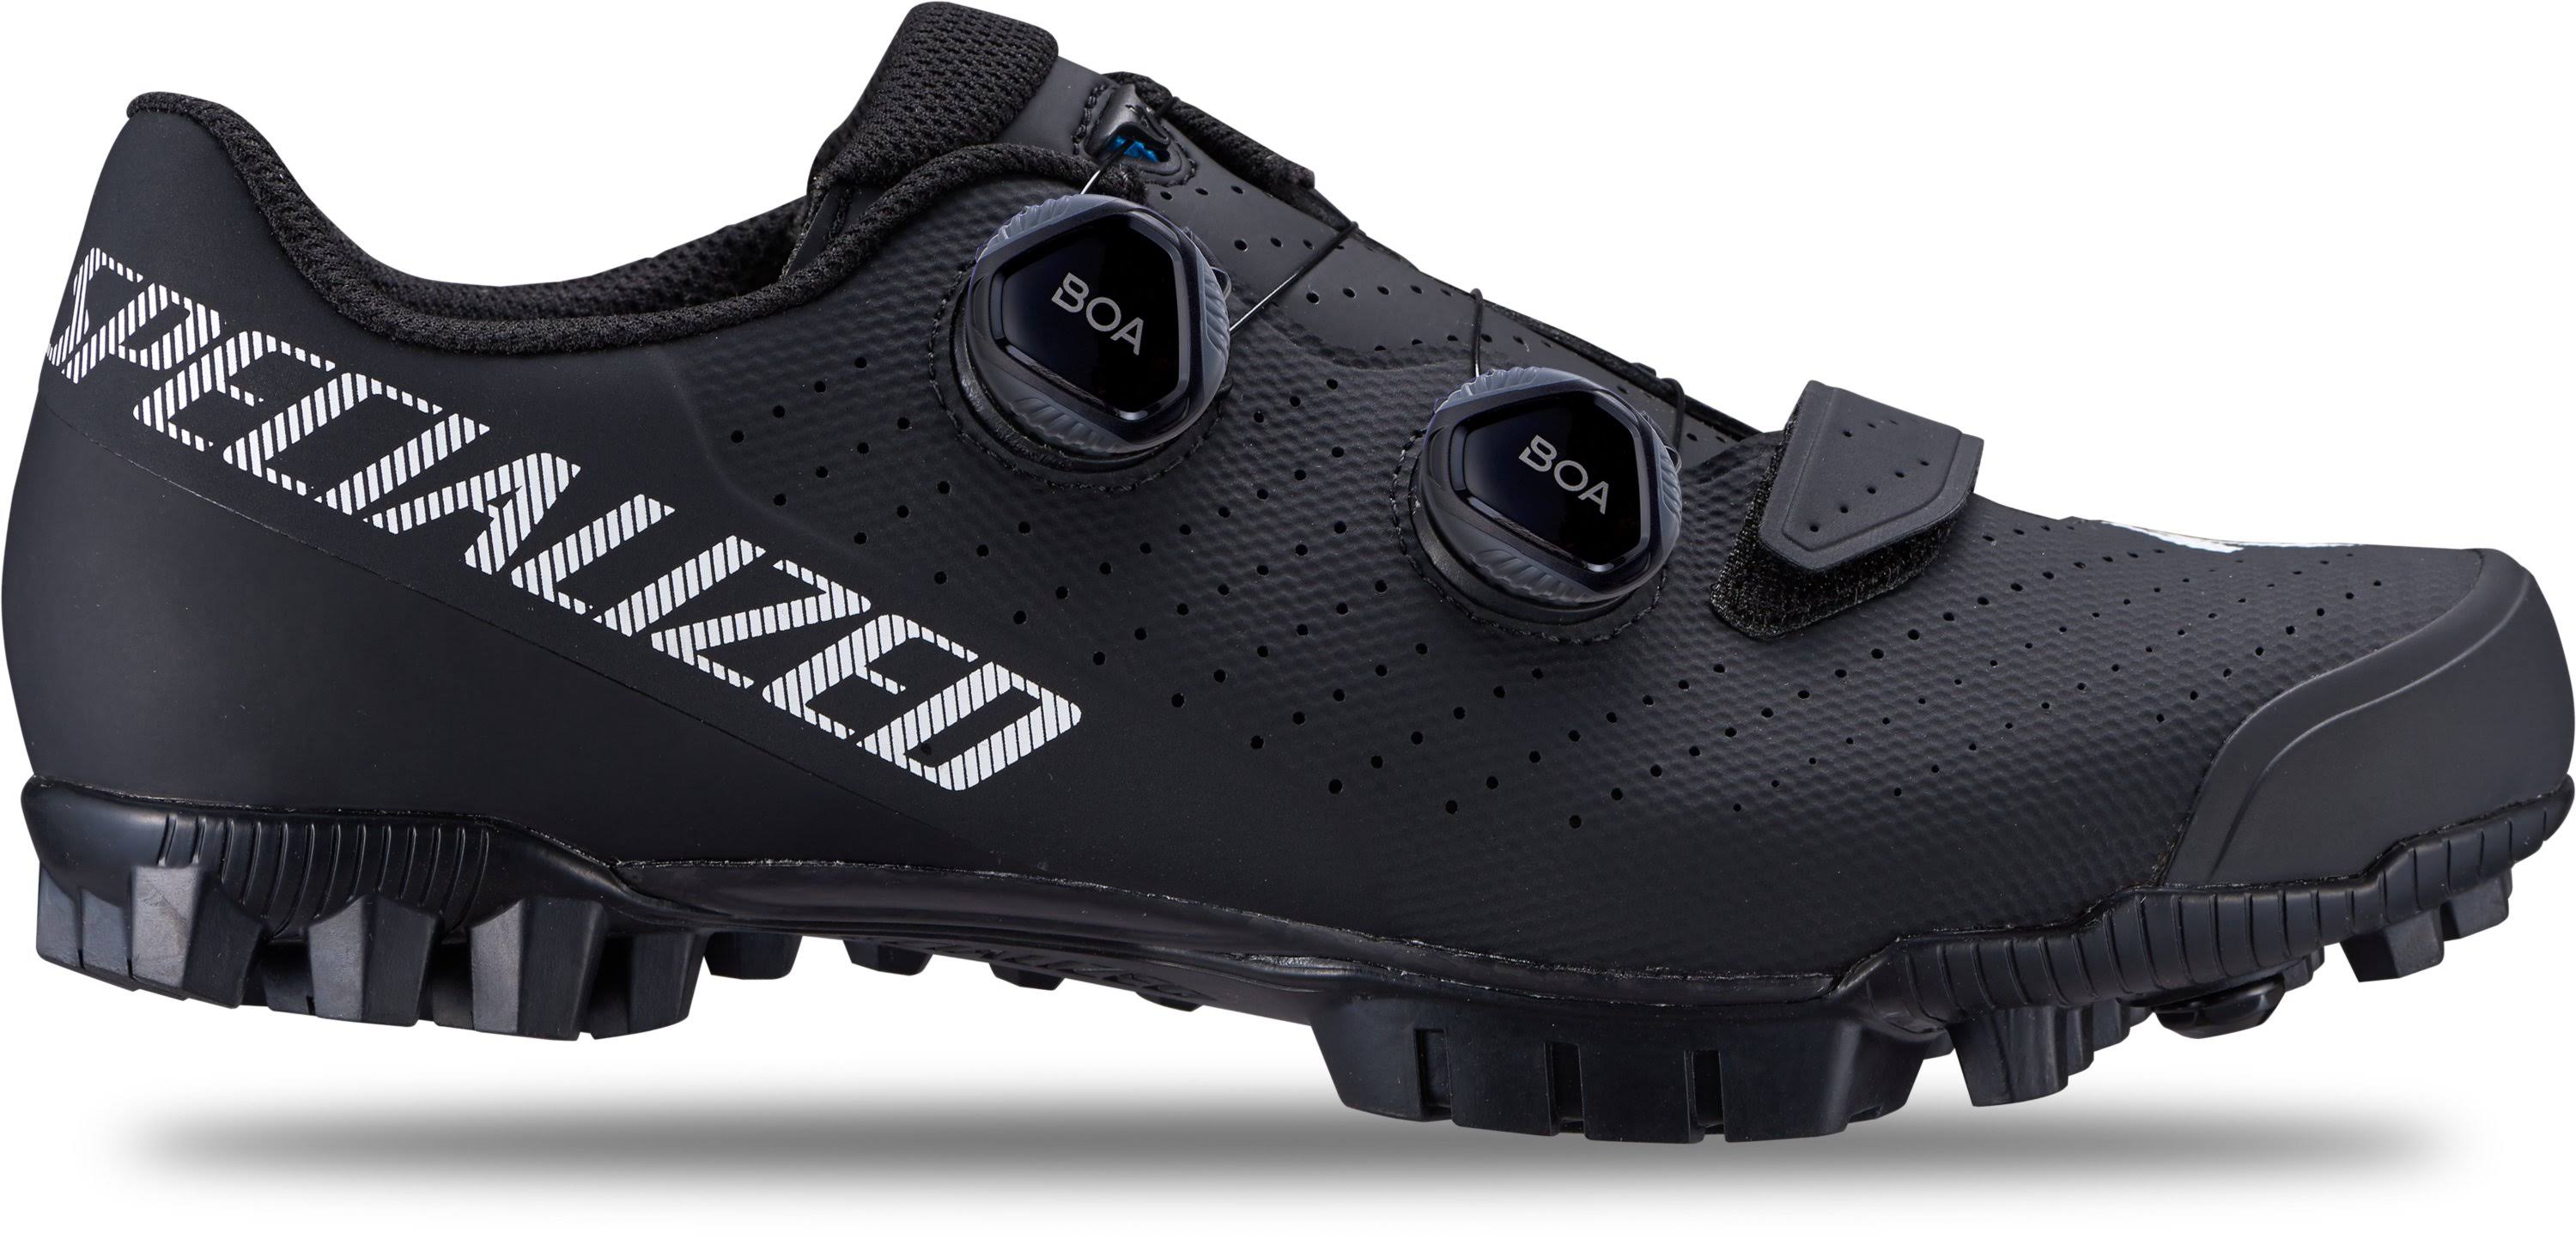 Specialized Recon 1.0 Mountain Bike Shoes - Black - 40 | Crooze